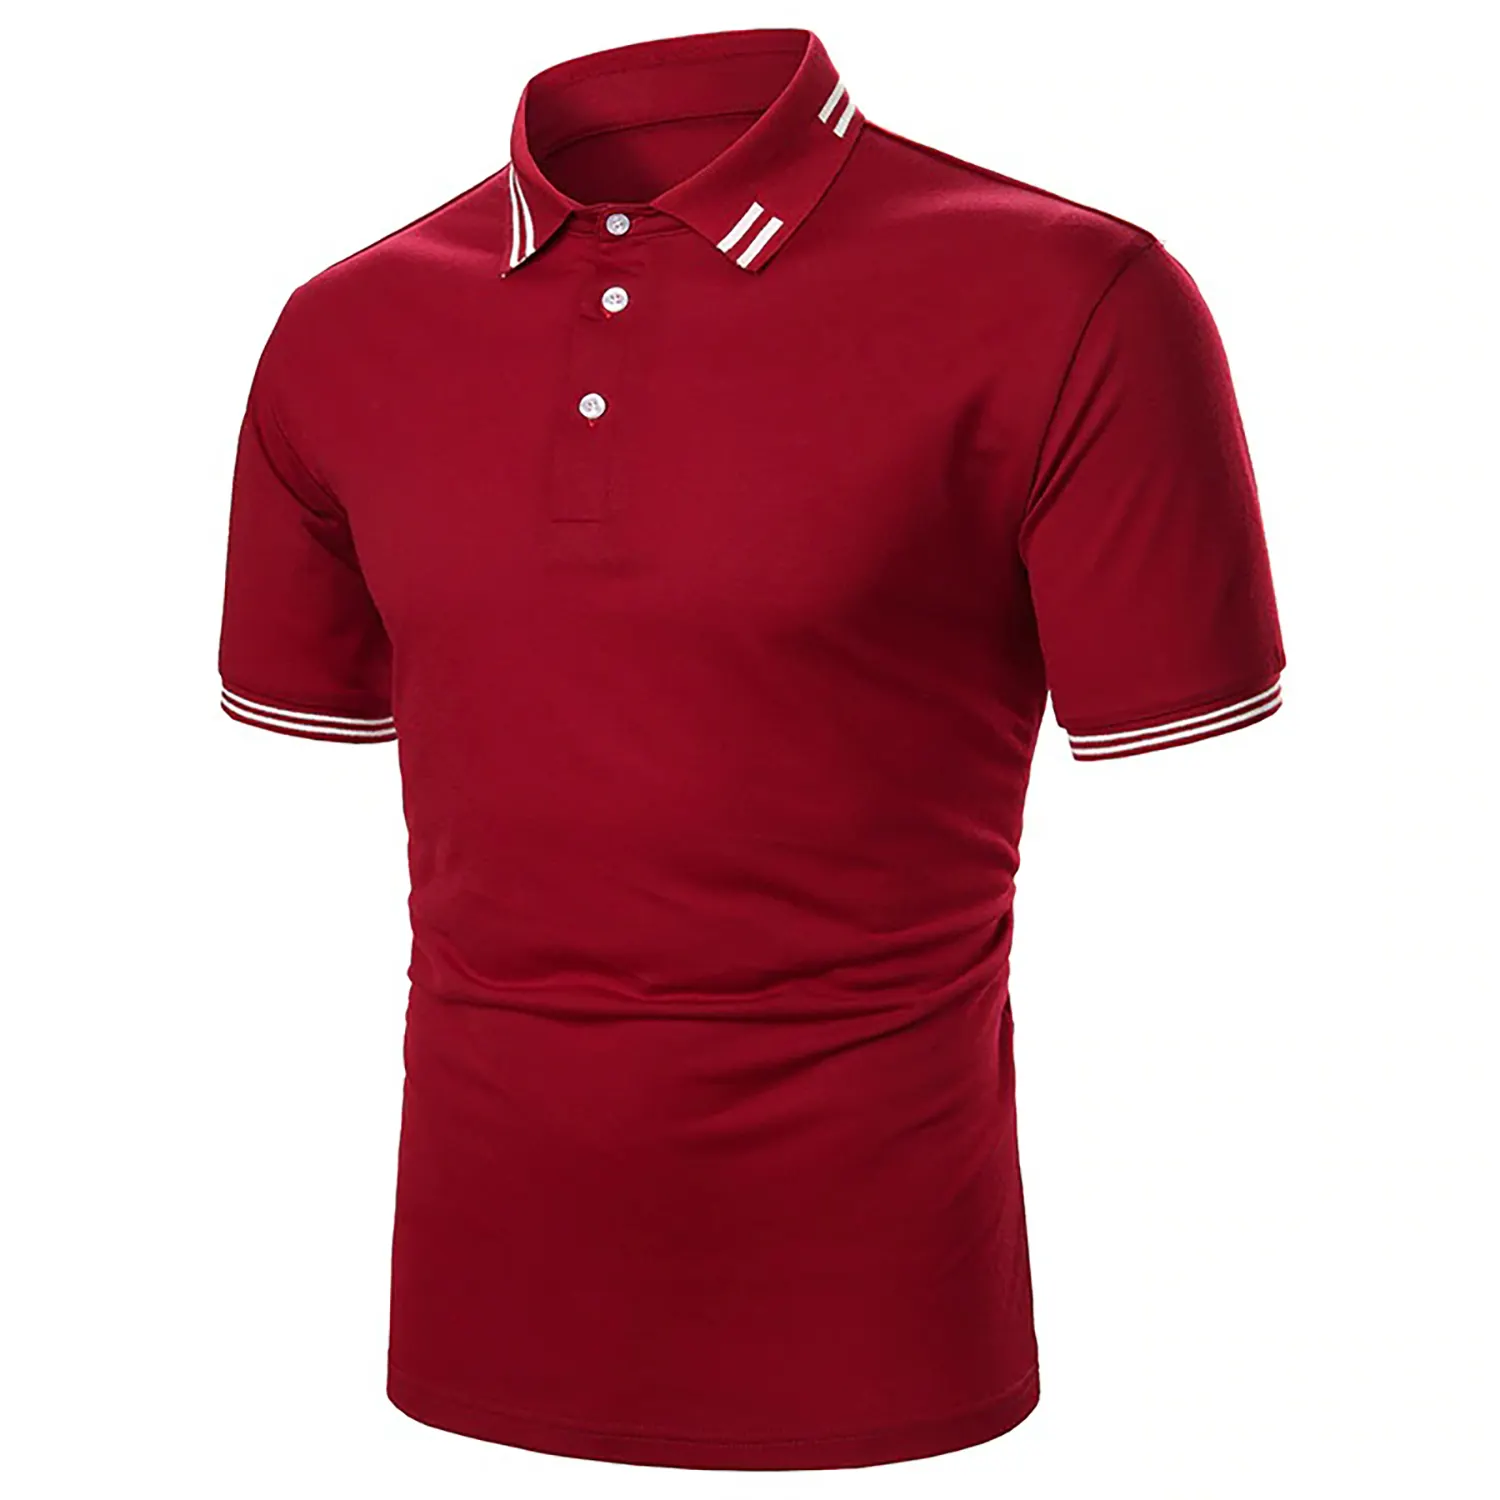 New Top high quality 100%cotton spandex mens business polo T shirts